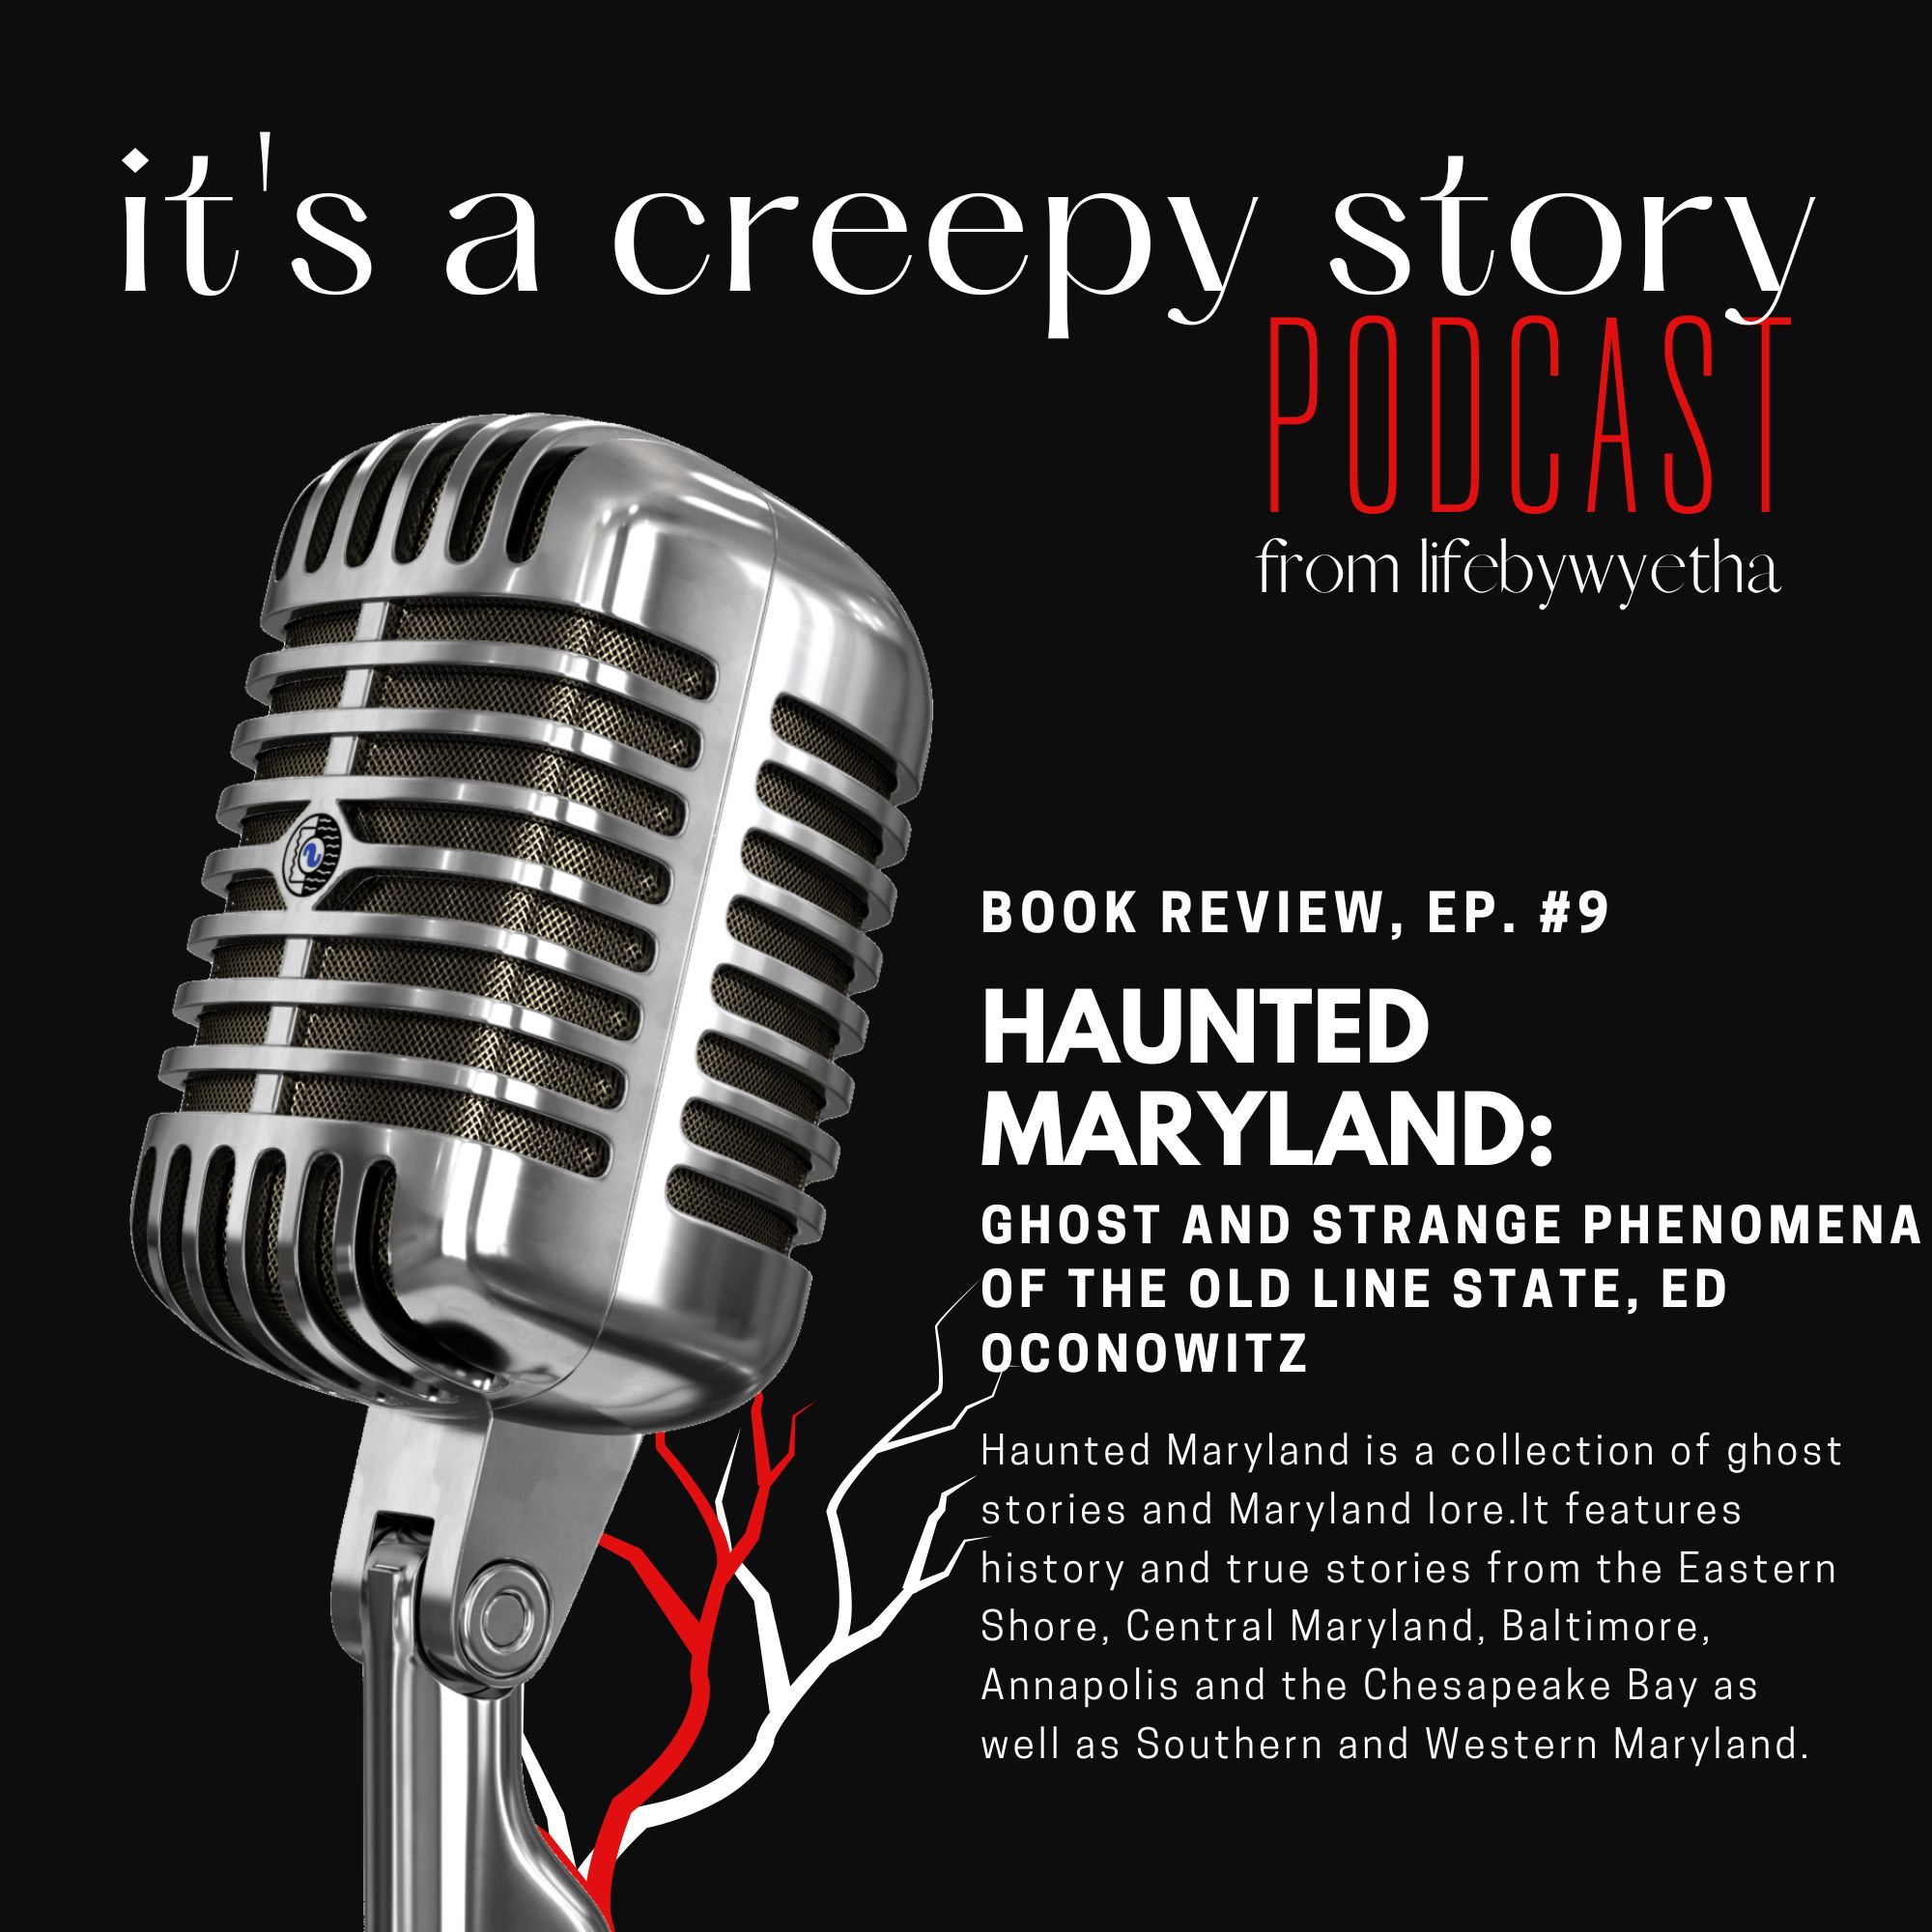 Podcast Sn. 2, It’s a Creepy Story: Episode #9